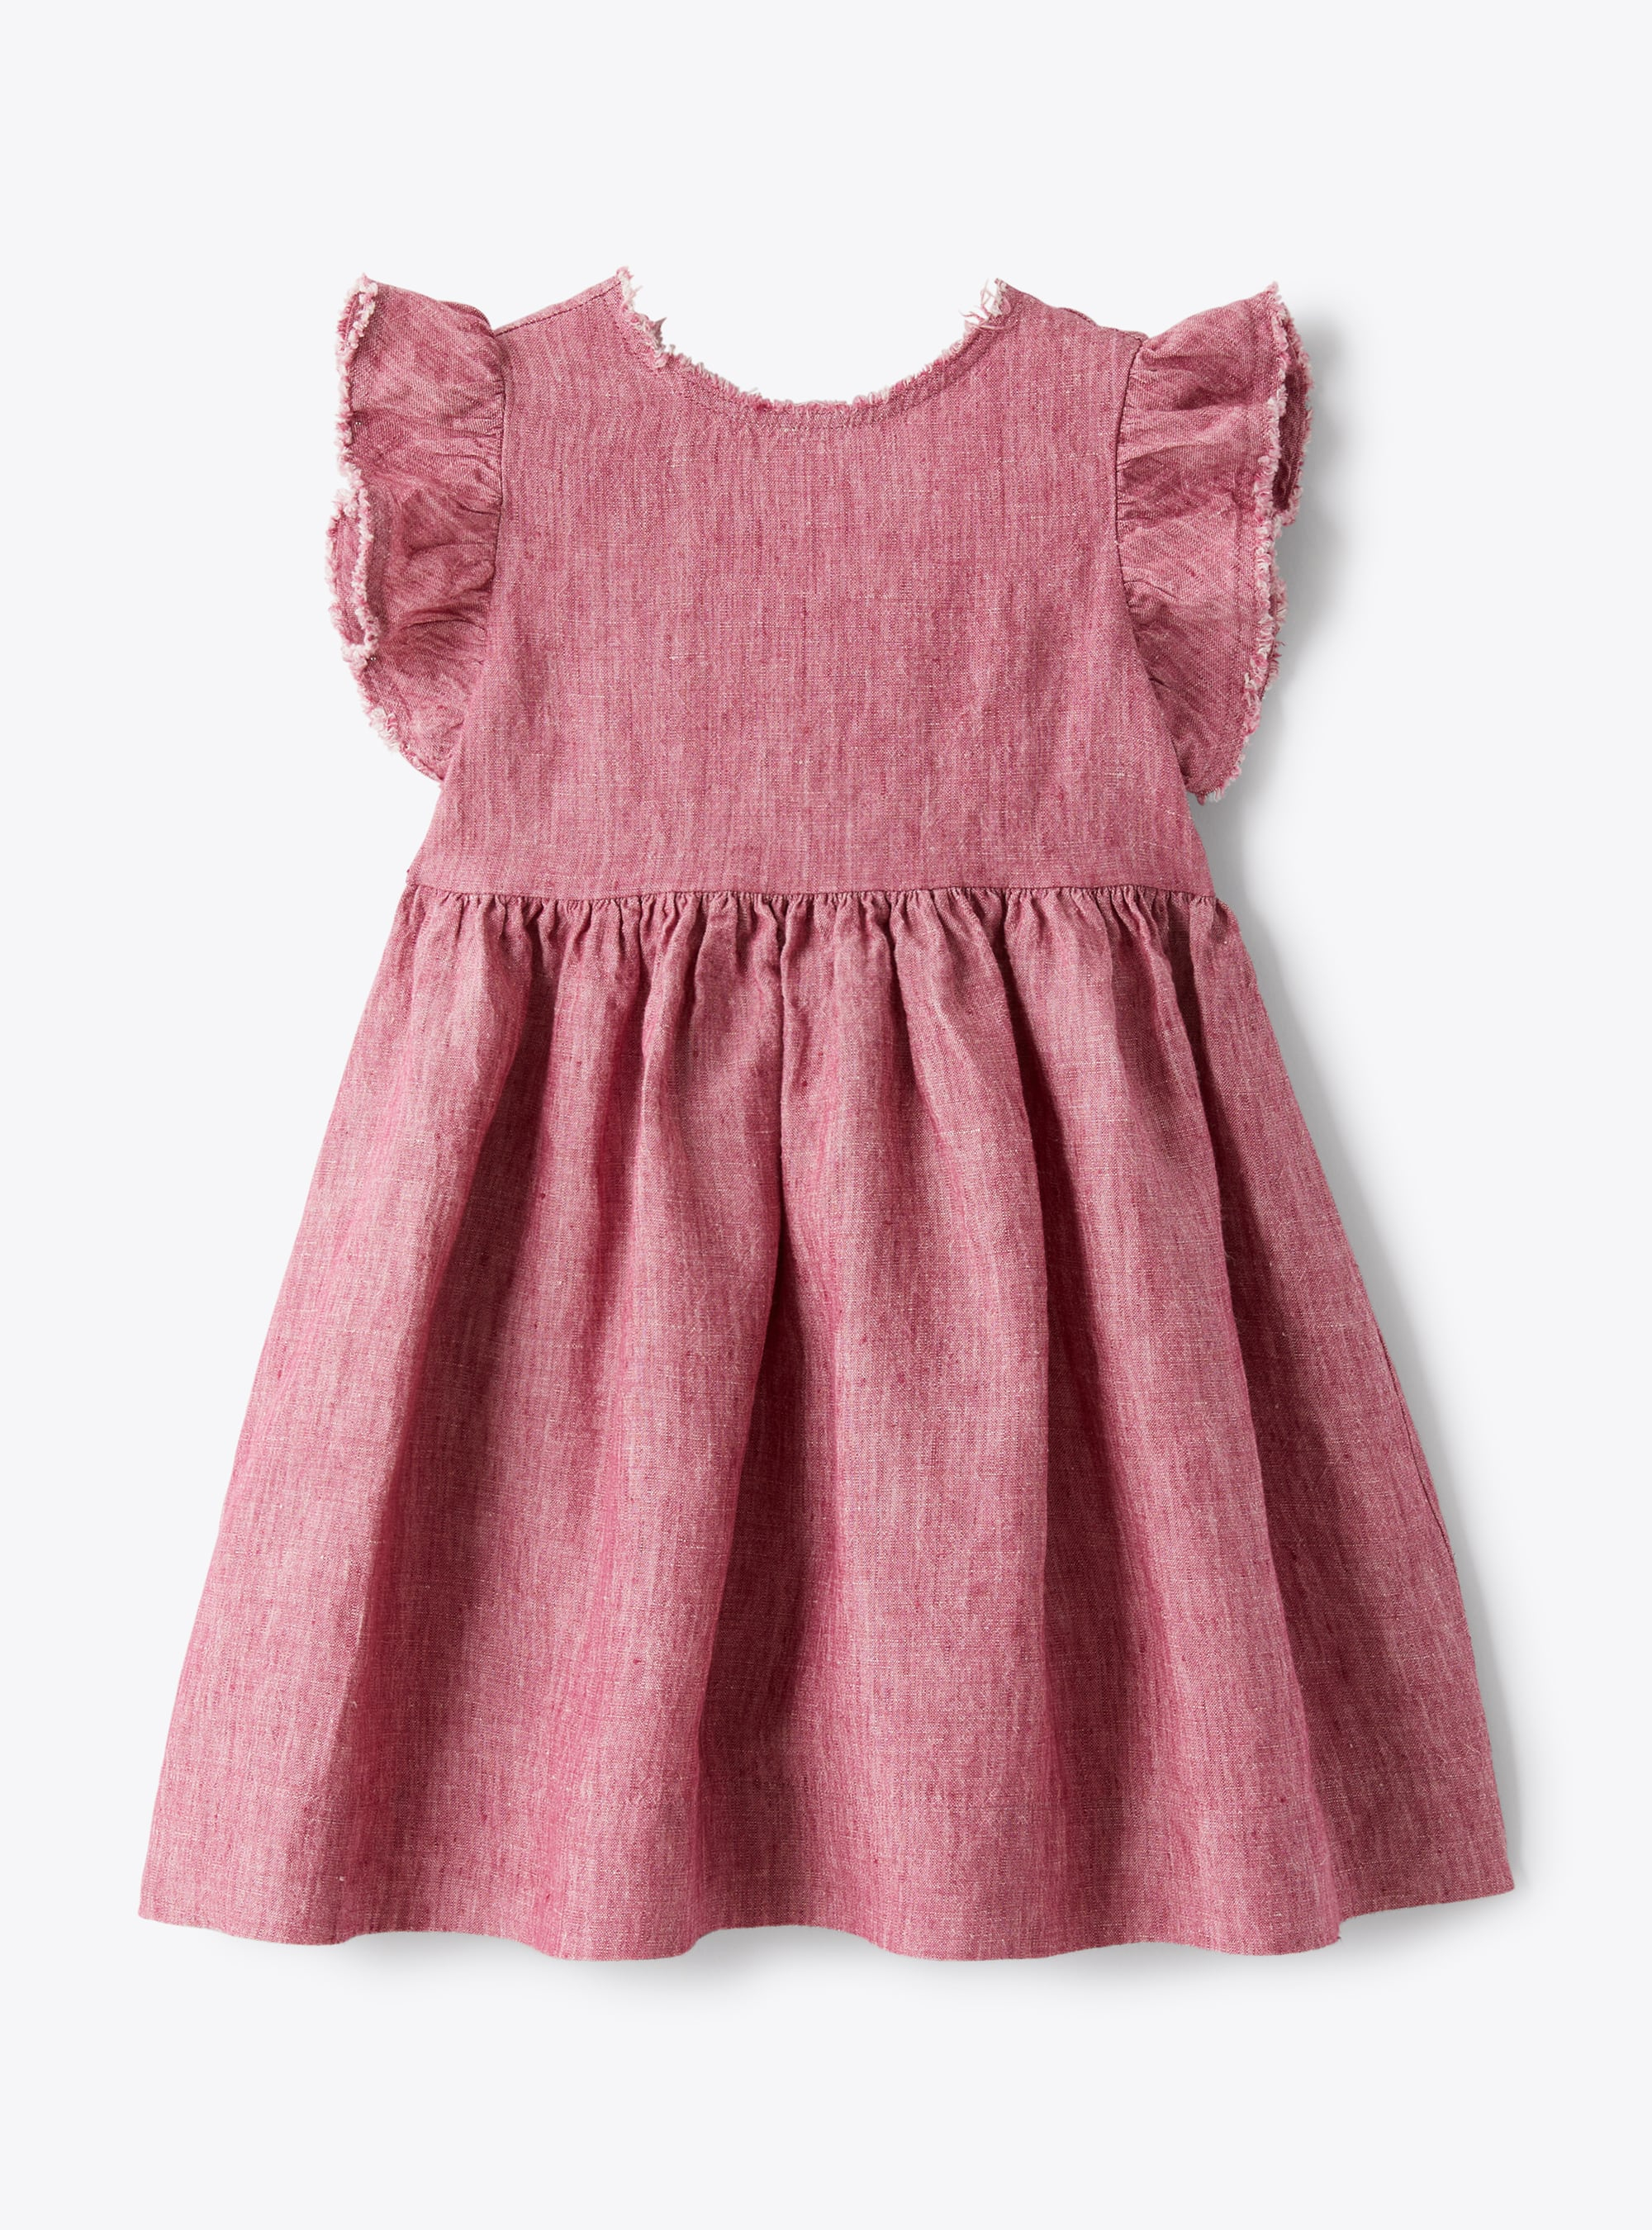 Linen dress with a bow detail in onion purple - Dresses - Il Gufo